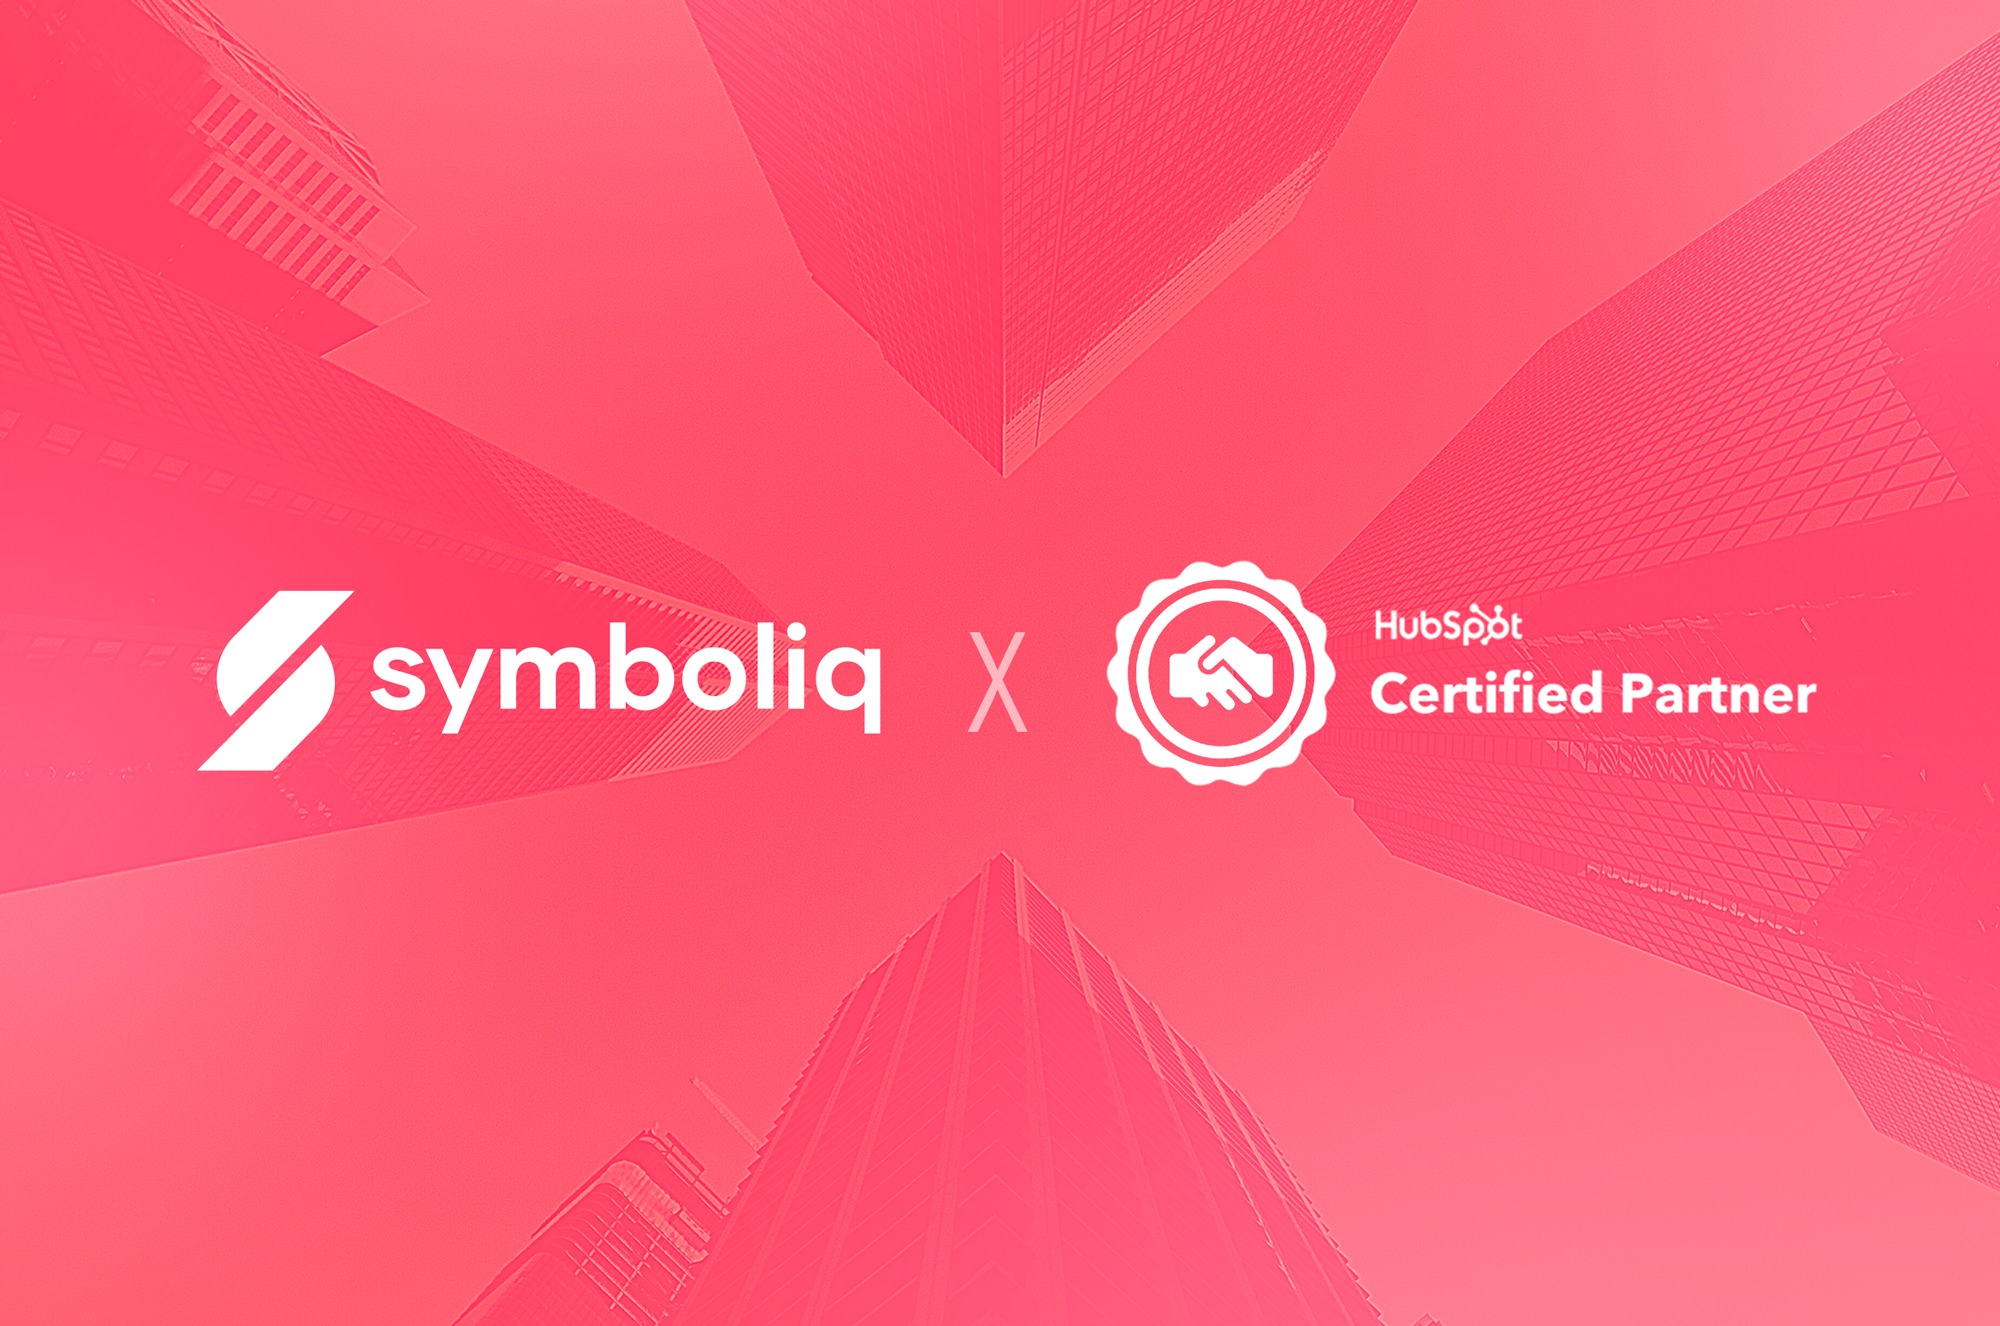 Symboliq Media announces Certified Agency Partnership with HubSpot